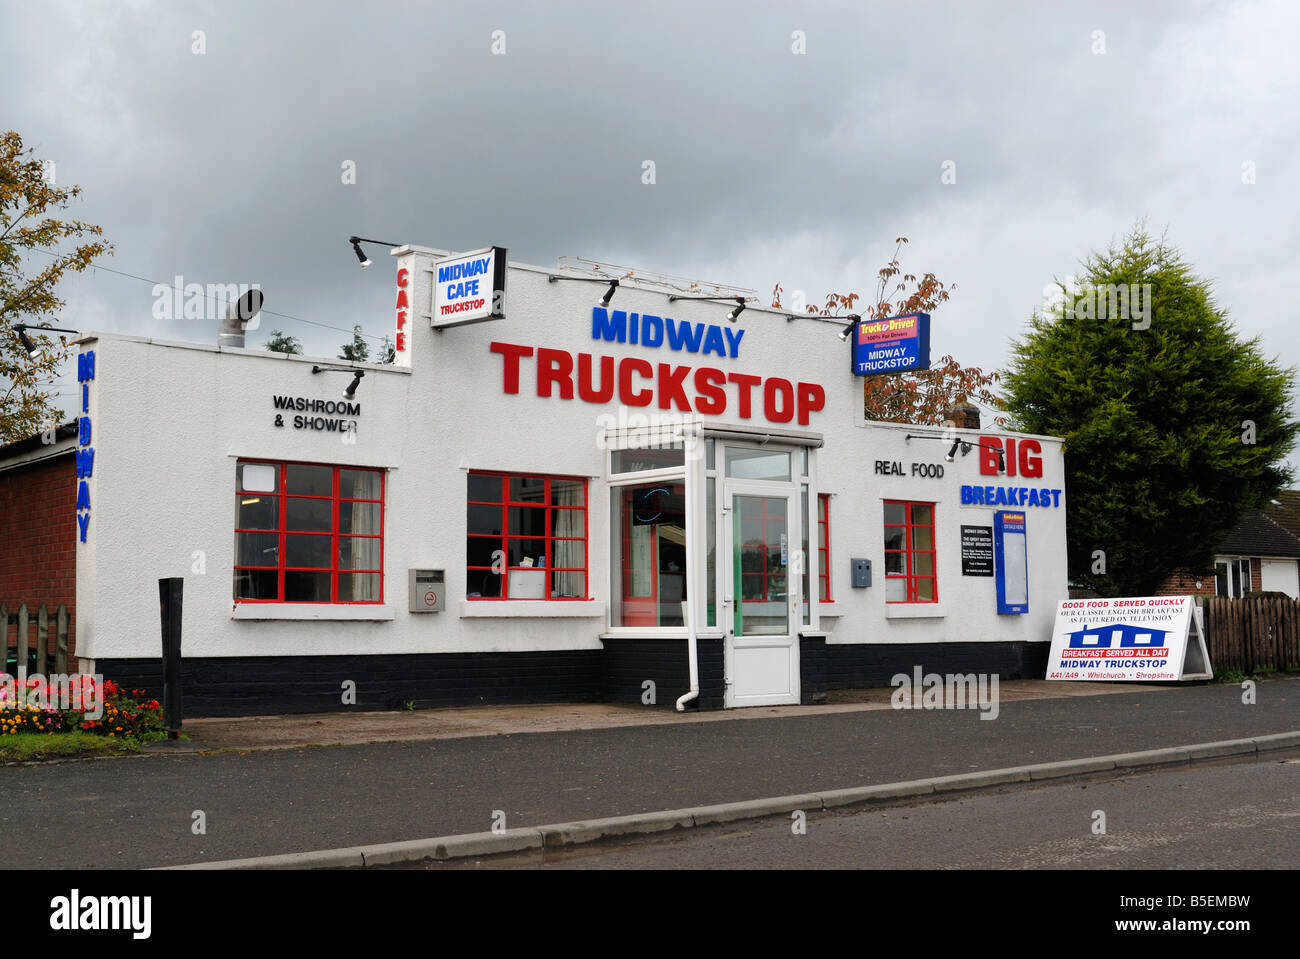 Midway Truckstop situated near Whitchurch in Shropshire. Stock Photo